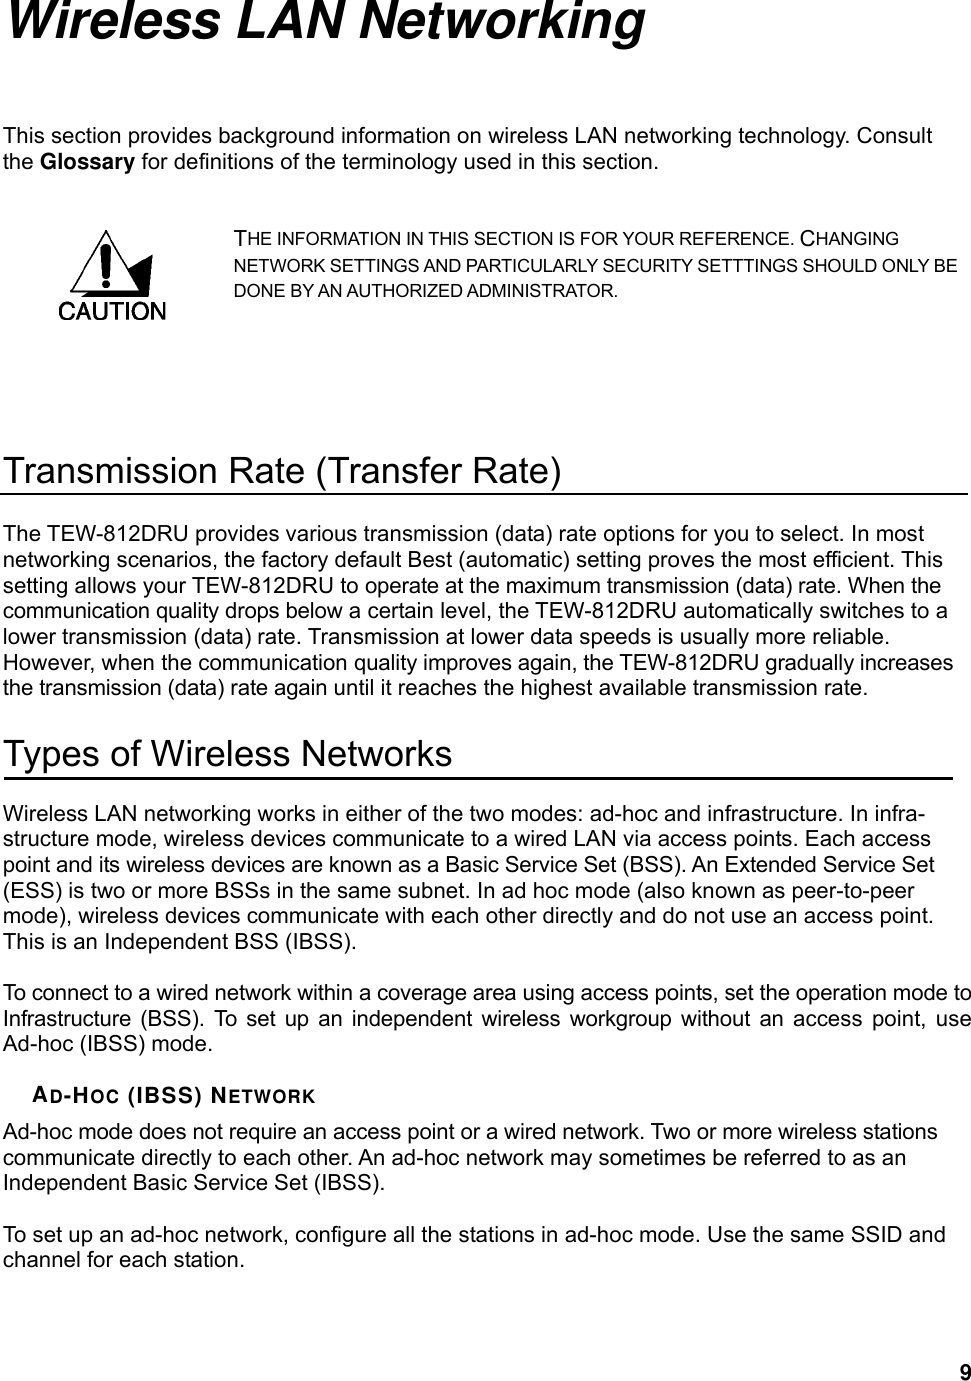  9Wireless LAN Networking This section provides background information on wireless LAN networking technology. Consult the Glossary for definitions of the terminology used in this section. THE INFORMATION IN THIS SECTION IS FOR YOUR REFERENCE. CHANGING NETWORK SETTINGS AND PARTICULARLY SECURITY SETTTINGS SHOULD ONLY BE DONE BY AN AUTHORIZED ADMINISTRATOR.   Transmission Rate (Transfer Rate) The TEW-812DRU provides various transmission (data) rate options for you to select. In most networking scenarios, the factory default Best (automatic) setting proves the most efficient. This setting allows your TEW-812DRU to operate at the maximum transmission (data) rate. When the communication quality drops below a certain level, the TEW-812DRU automatically switches to a lower transmission (data) rate. Transmission at lower data speeds is usually more reliable. However, when the communication quality improves again, the TEW-812DRU gradually increases the transmission (data) rate again until it reaches the highest available transmission rate. Types of Wireless Networks Wireless LAN networking works in either of the two modes: ad-hoc and infrastructure. In infra-structure mode, wireless devices communicate to a wired LAN via access points. Each access point and its wireless devices are known as a Basic Service Set (BSS). An Extended Service Set (ESS) is two or more BSSs in the same subnet. In ad hoc mode (also known as peer-to-peer mode), wireless devices communicate with each other directly and do not use an access point. This is an Independent BSS (IBSS).  To connect to a wired network within a coverage area using access points, set the operation mode to Infrastructure (BSS). To set up an independent wireless workgroup without an access point, use Ad-hoc (IBSS) mode.  AD-HOC (IBSS) NETWORK Ad-hoc mode does not require an access point or a wired network. Two or more wireless stations communicate directly to each other. An ad-hoc network may sometimes be referred to as an Independent Basic Service Set (IBSS).  To set up an ad-hoc network, configure all the stations in ad-hoc mode. Use the same SSID and channel for each station.  